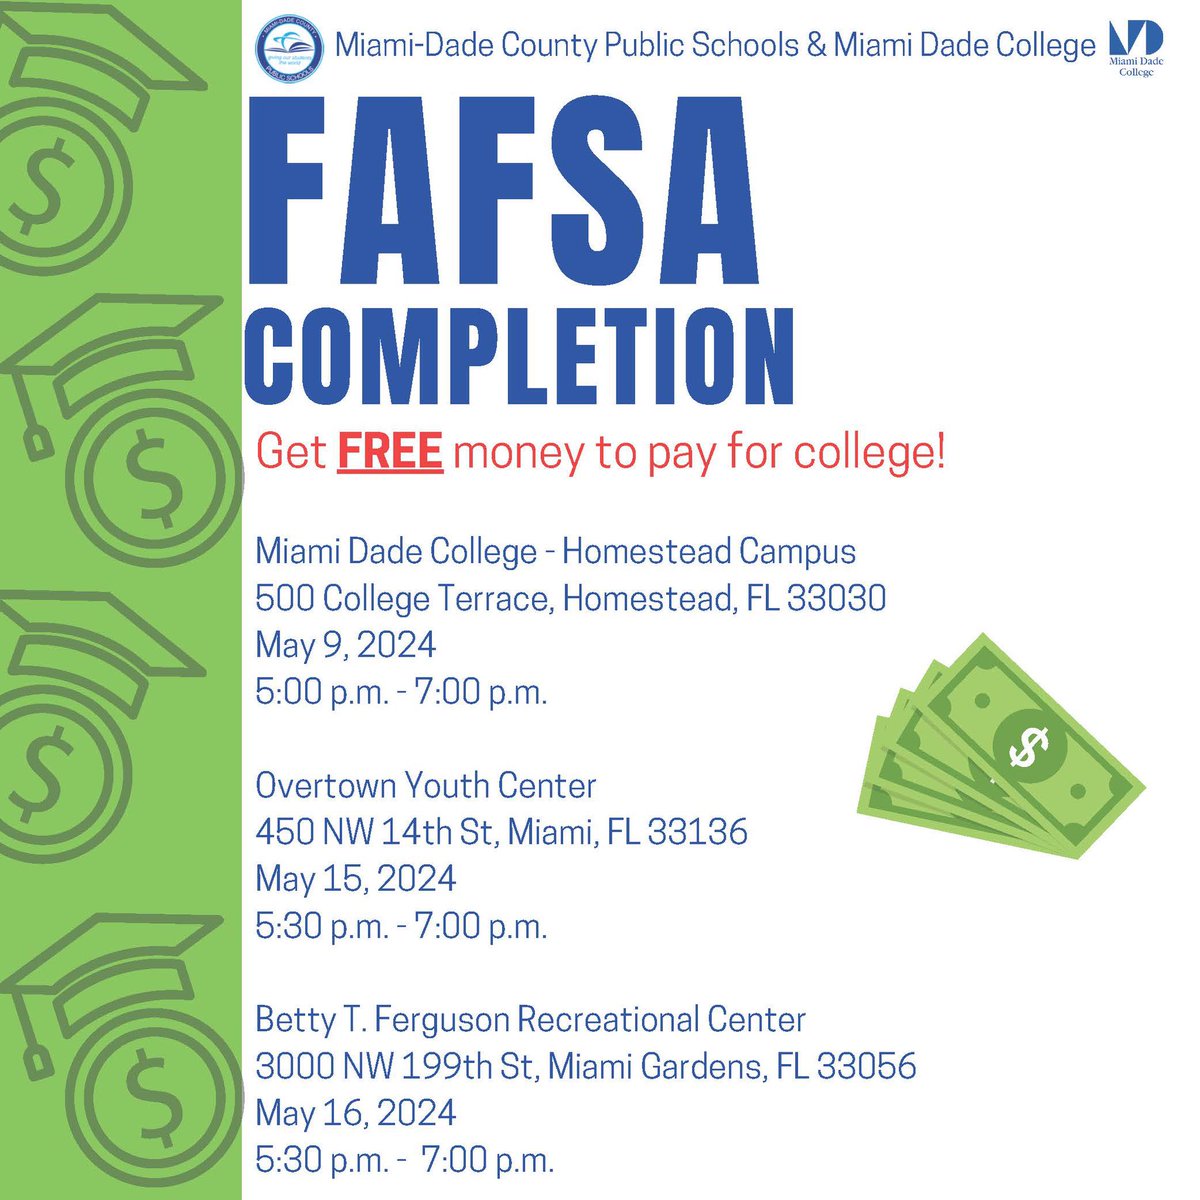 Parents we want to help you get free money to pay for college! High school seniors & their families can join us at one of our upcoming FAFSA events where financial aid experts from @MDCollege will walk you through the application process. @MDCPS @SuptDotres @LDIAZ_CAO